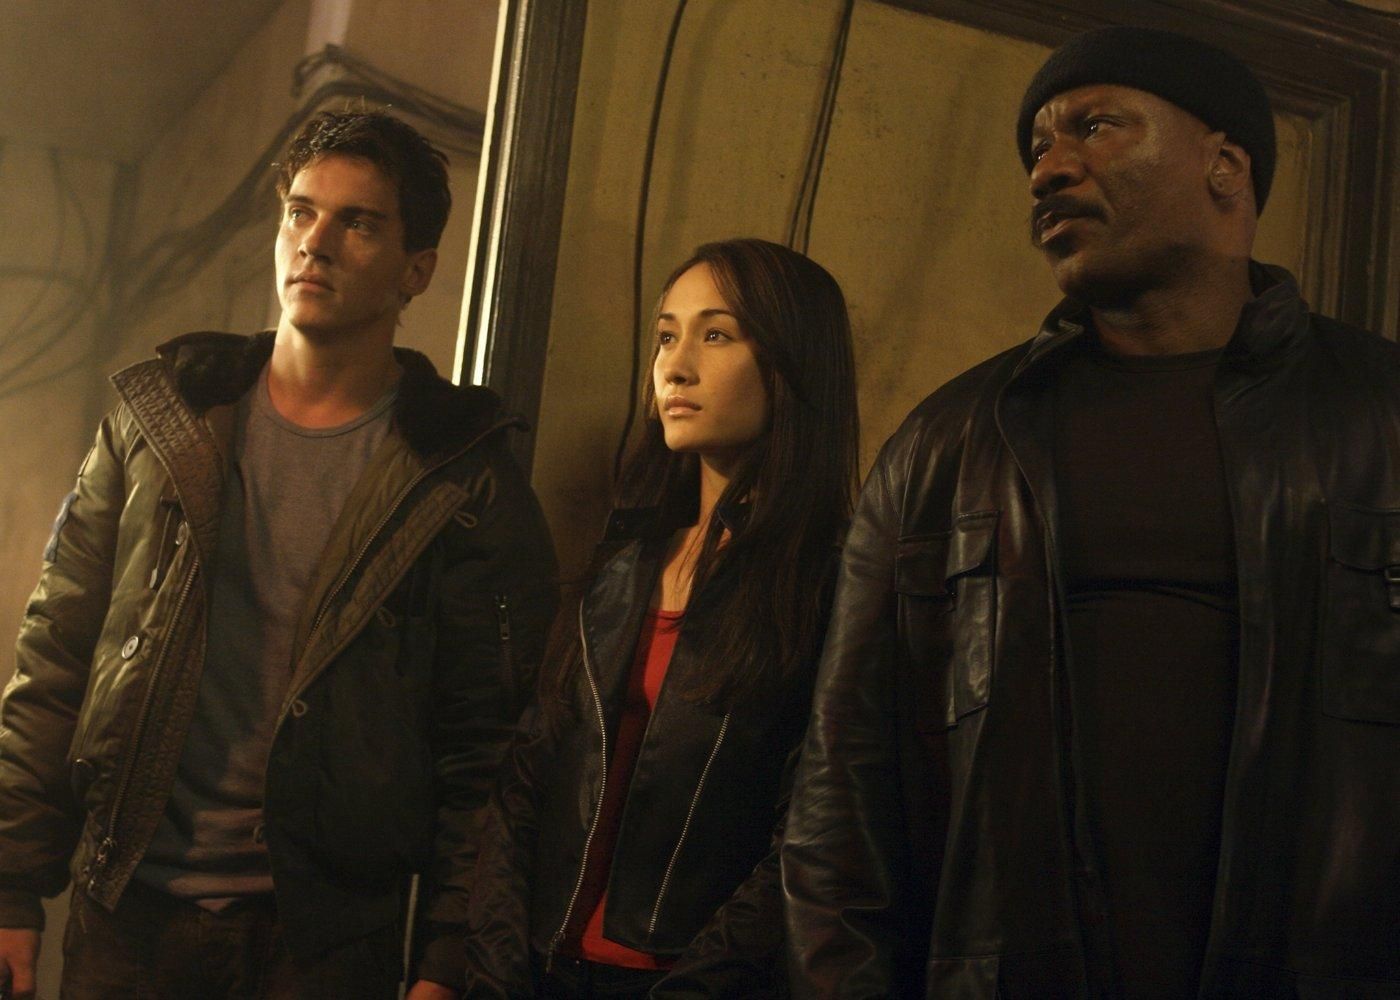 Jonathan Rhys Meyers, Maggie Q and Ving Rhames in Mission: Impossible 3